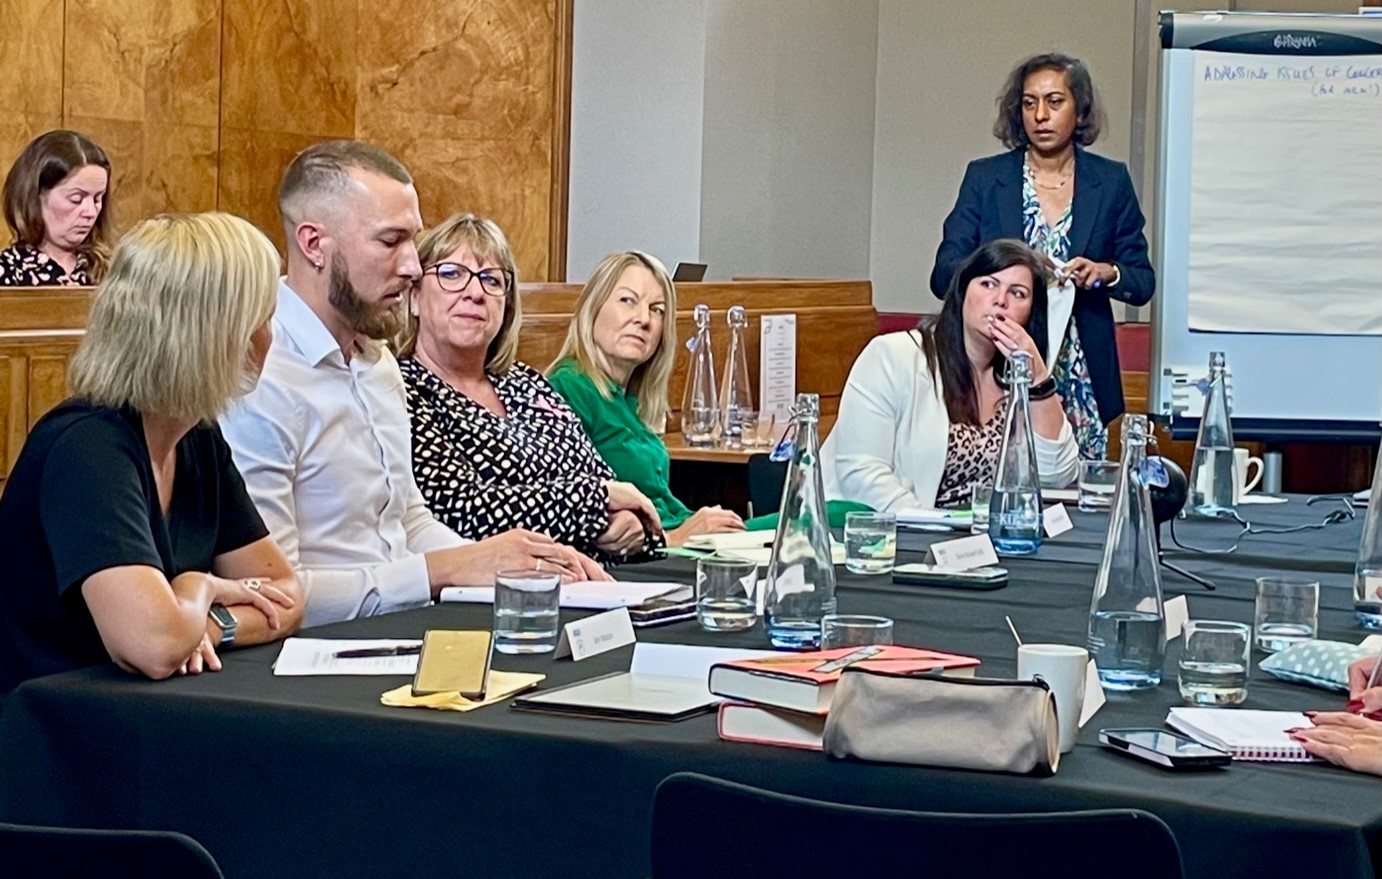 Following the launch of the Construction Inclusion Coalition in September, founder member Baxi hosted a roundtable discussion at RIBA, The Royal Institute of British Architects, focused on addressing gender imbalance and other equality, diversity and inclusion (EDI) considerations in the construction industry.